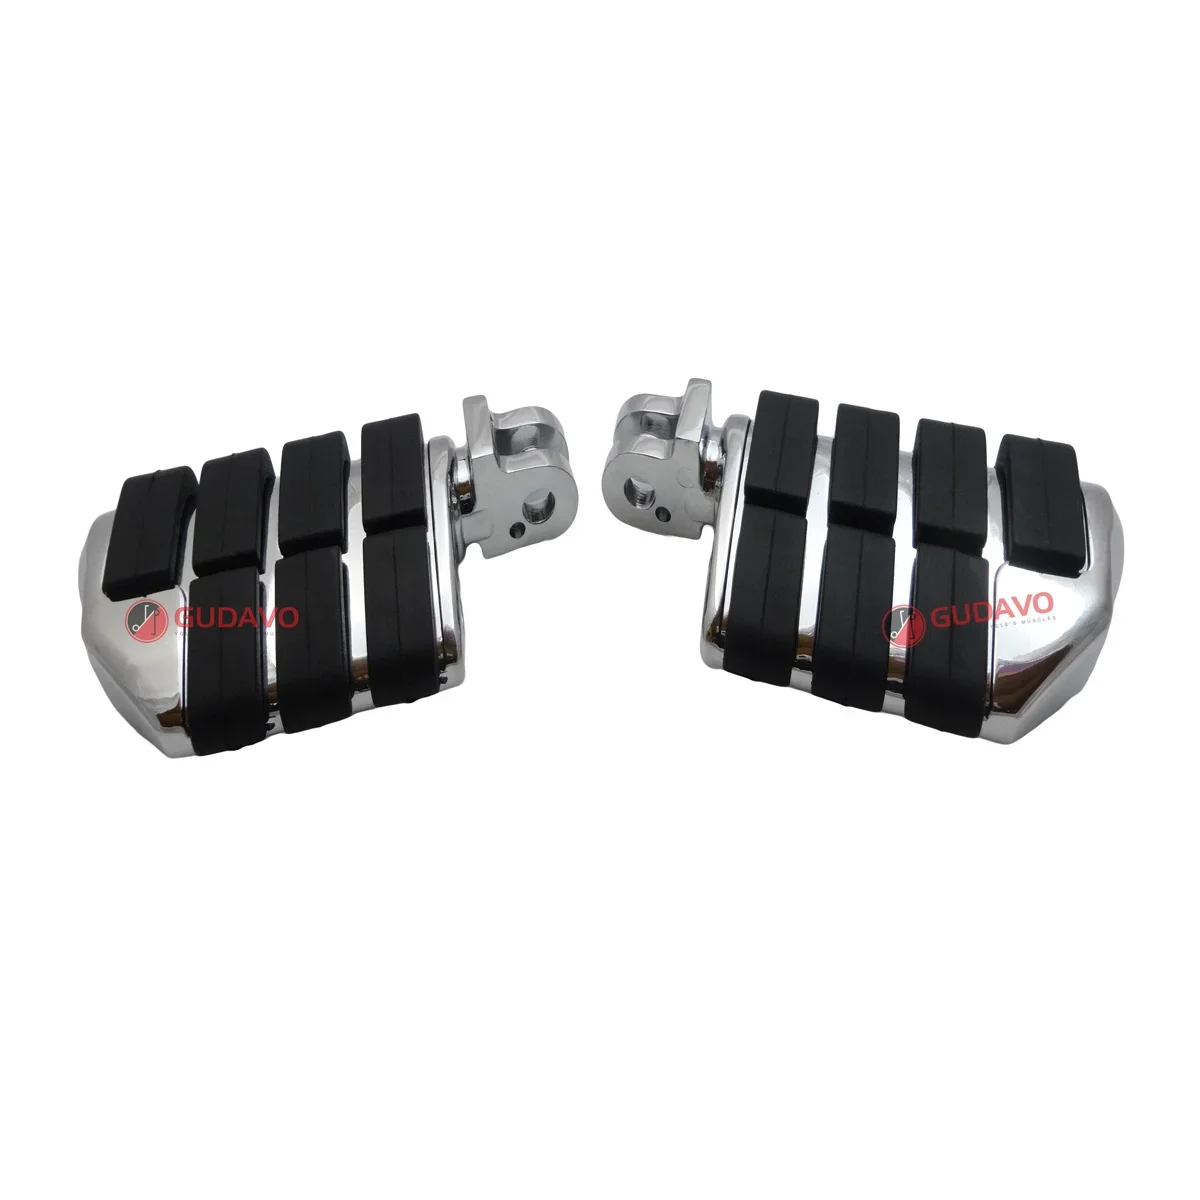 Gudavo Motorcycle Foot Pegs Rear Chrome Foot Pedals Passenger Pegs with ... - $108.70